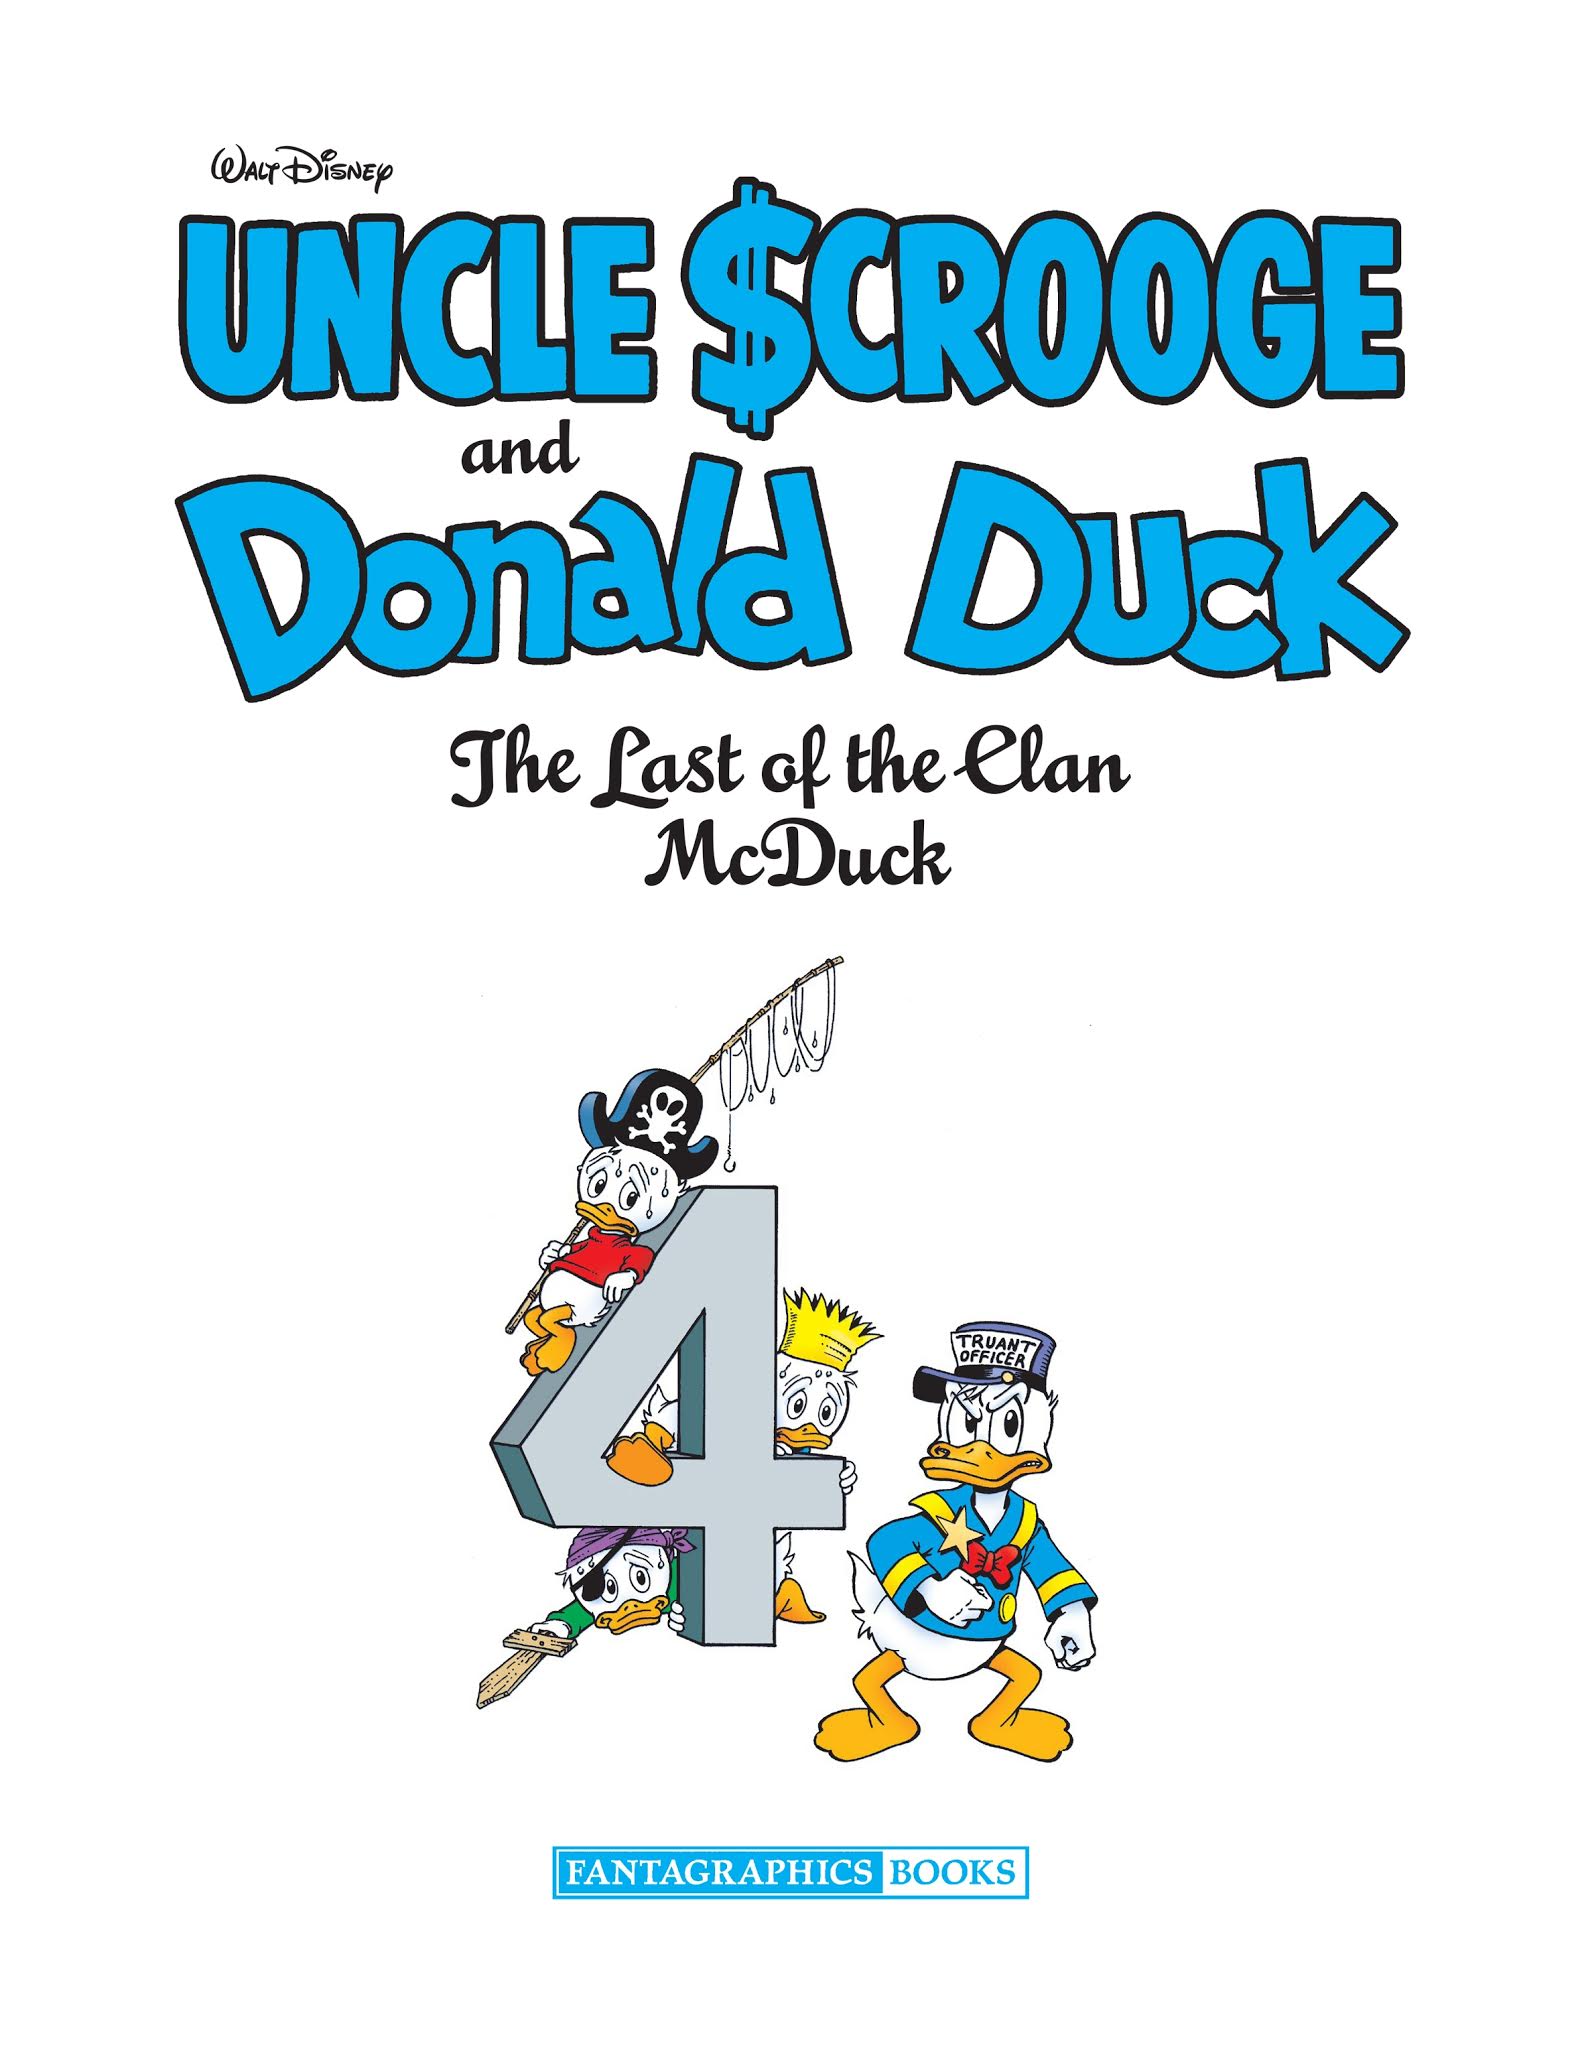 Read online Walt Disney Uncle Scrooge and Donald Duck: The Don Rosa Library comic -  Issue # TPB 4 (Part 1) - 4